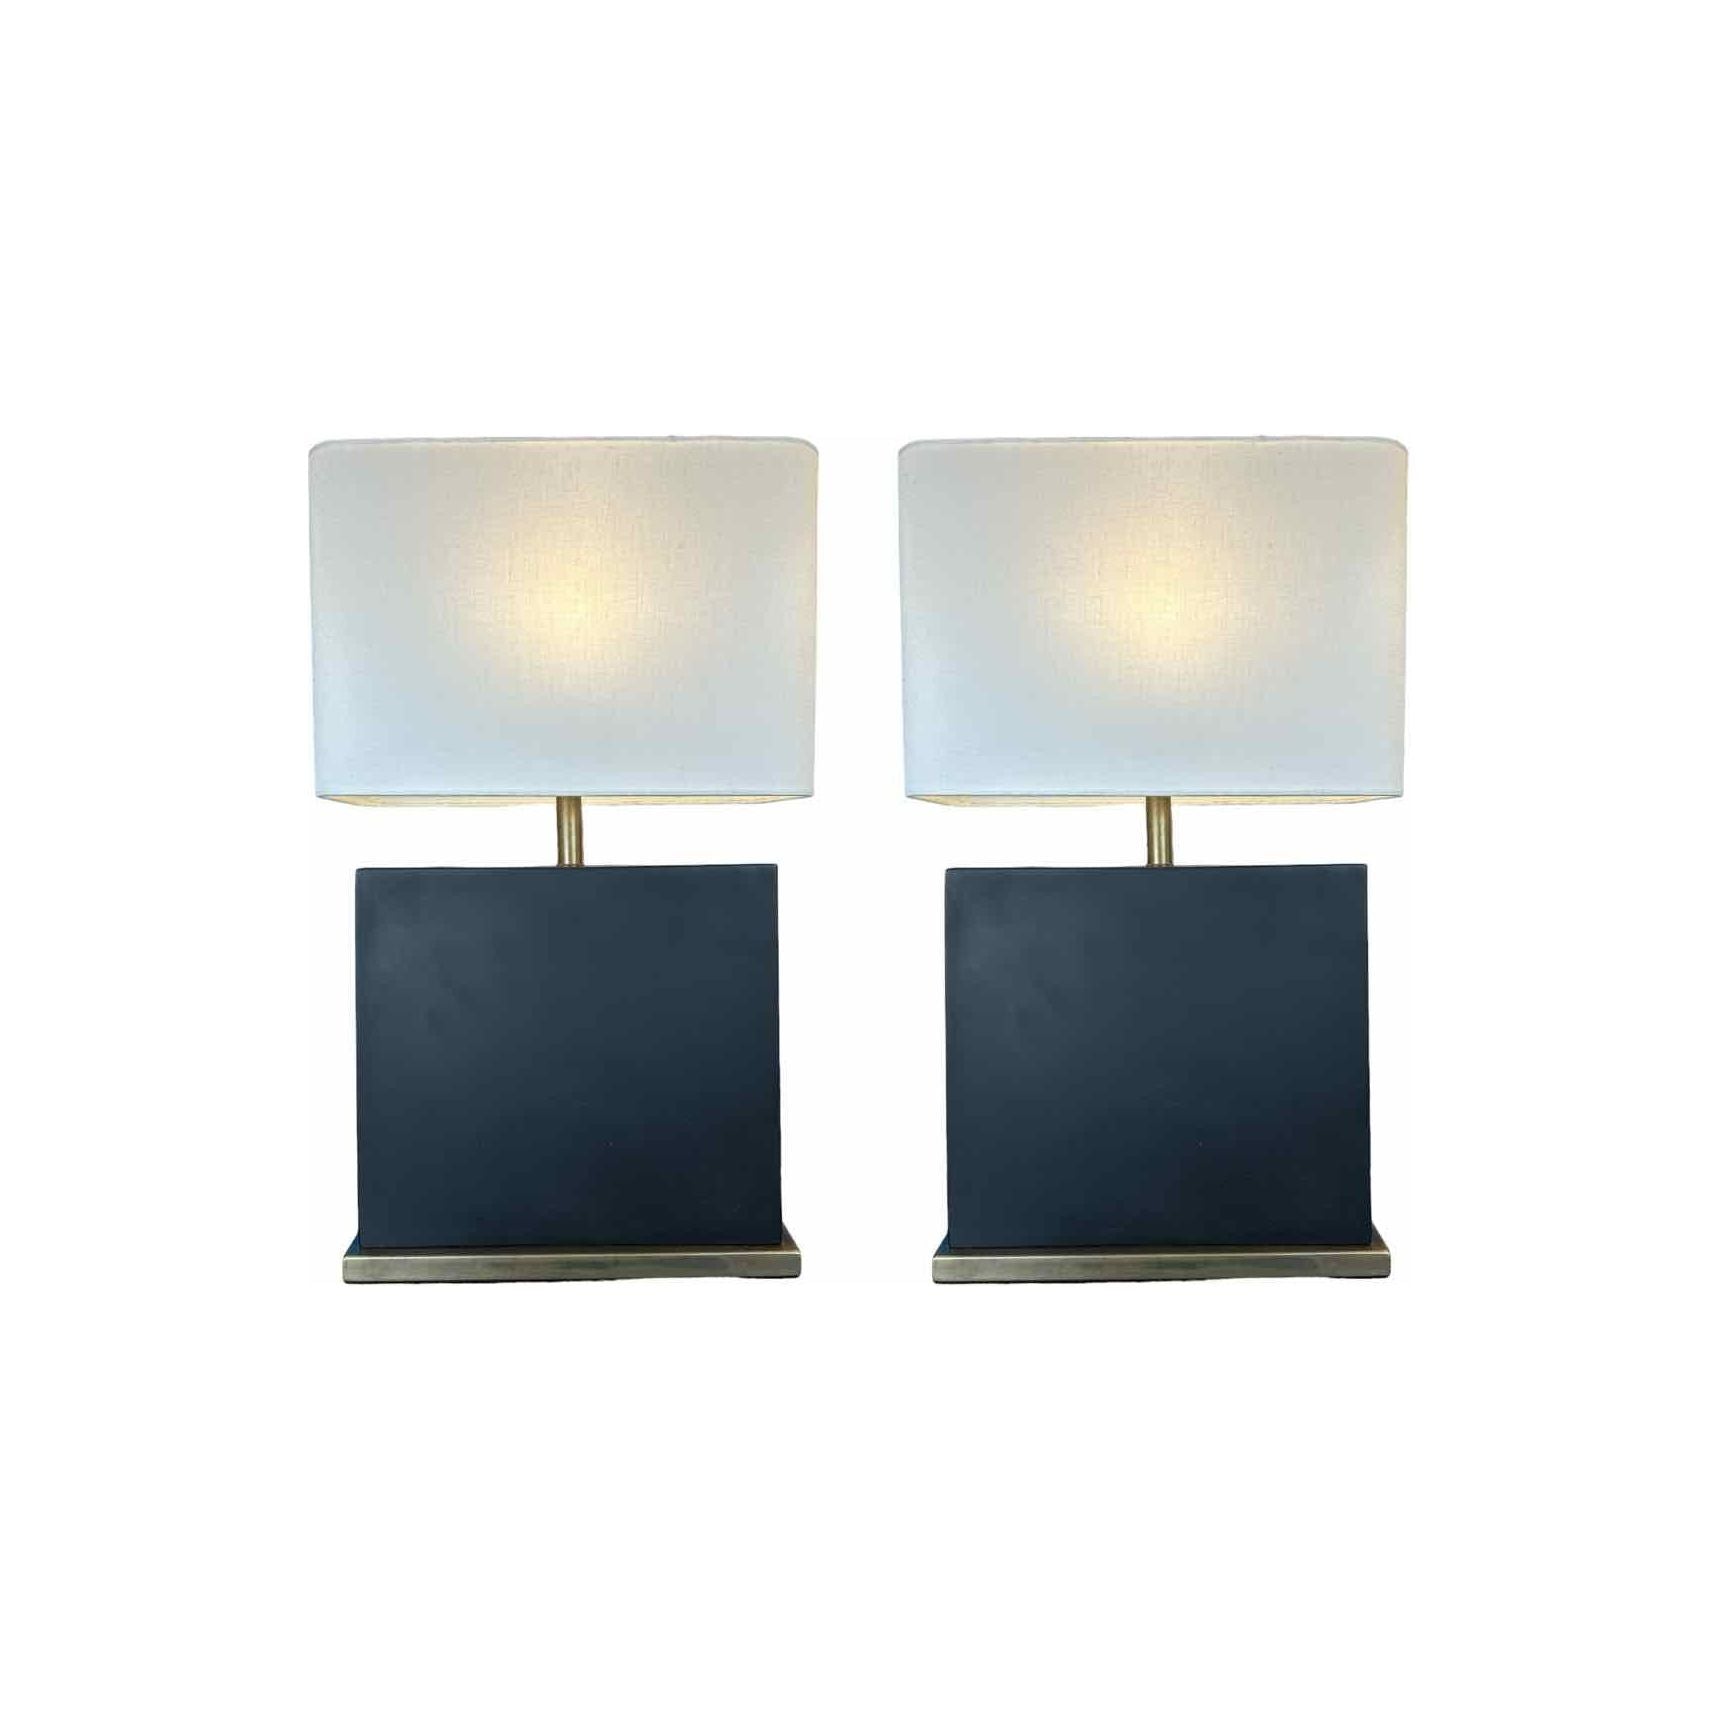 Pair of Martha Sturdy Table Lamps, fabricated in black resin